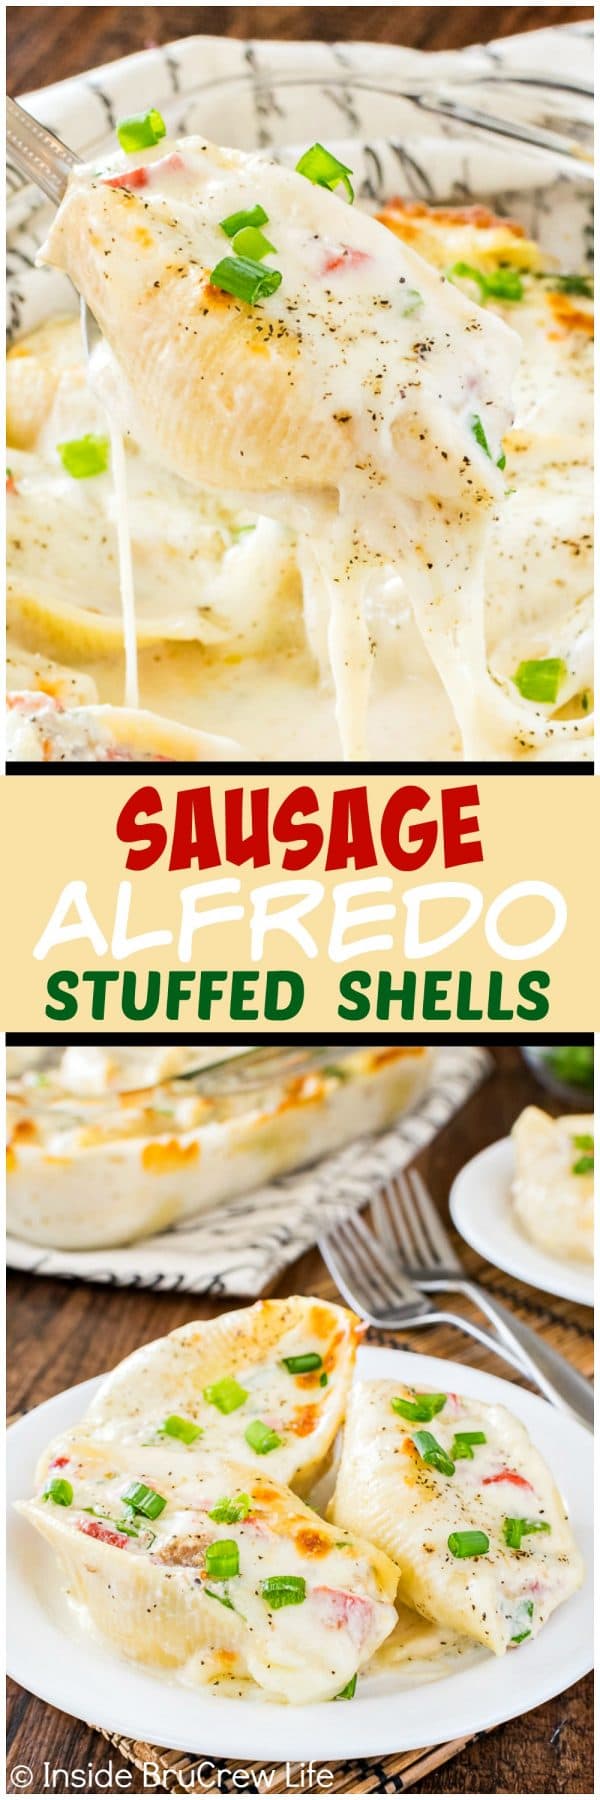 Sausage Alfredo Stuffed Shells - these easy pasta shells are stuffed with cheese,veggies, and meat making it a win at the dinner table. Easy recipe to have ready in 30 minutes!